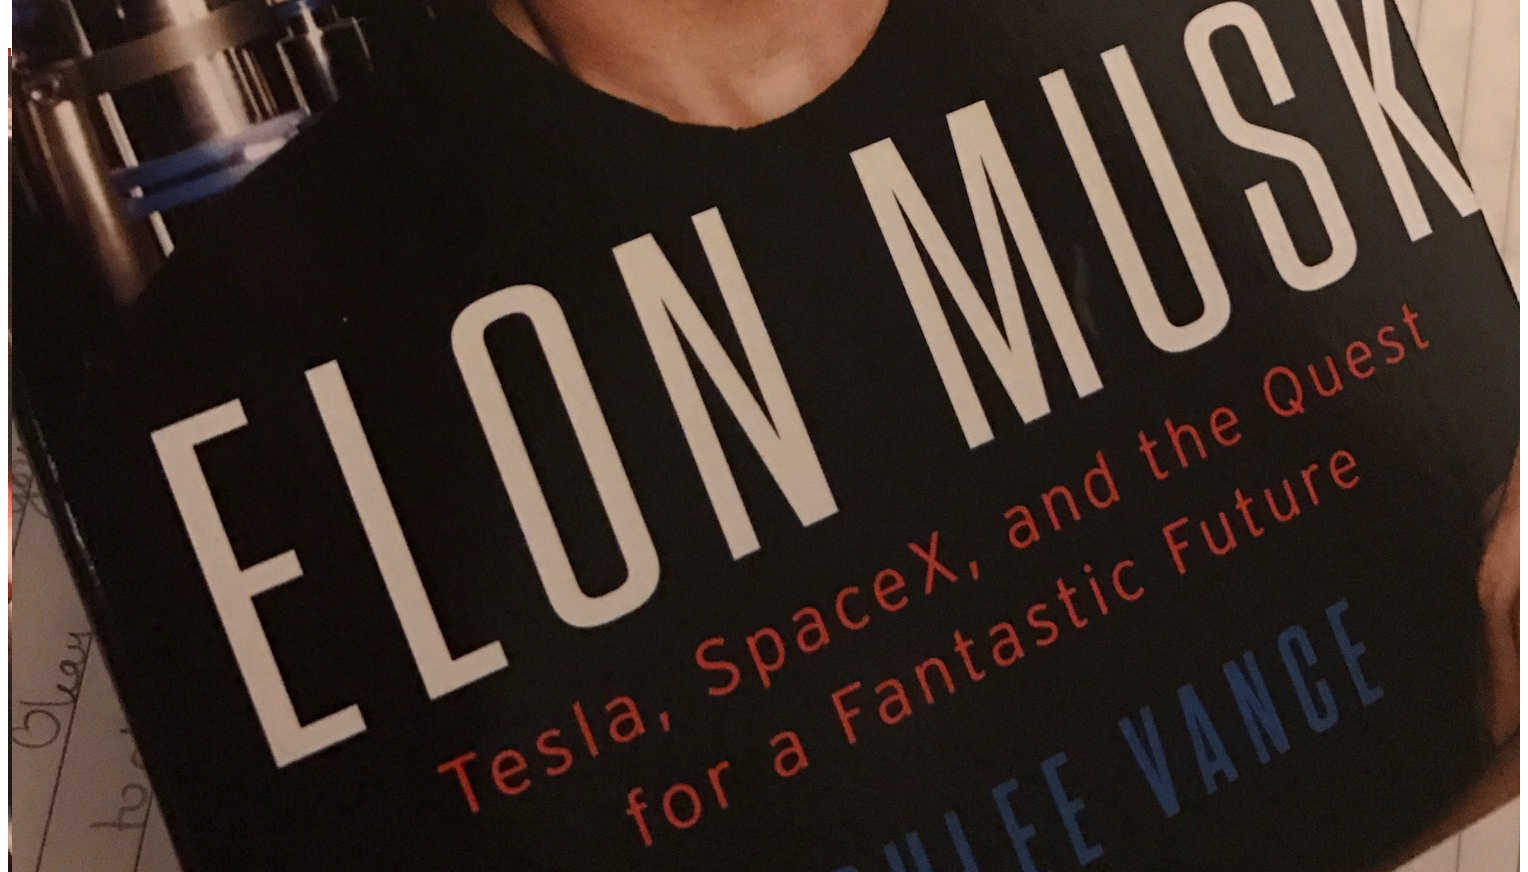 Book Review: Elon Musk and the 90 % of the Success Iceberg We Don’t See